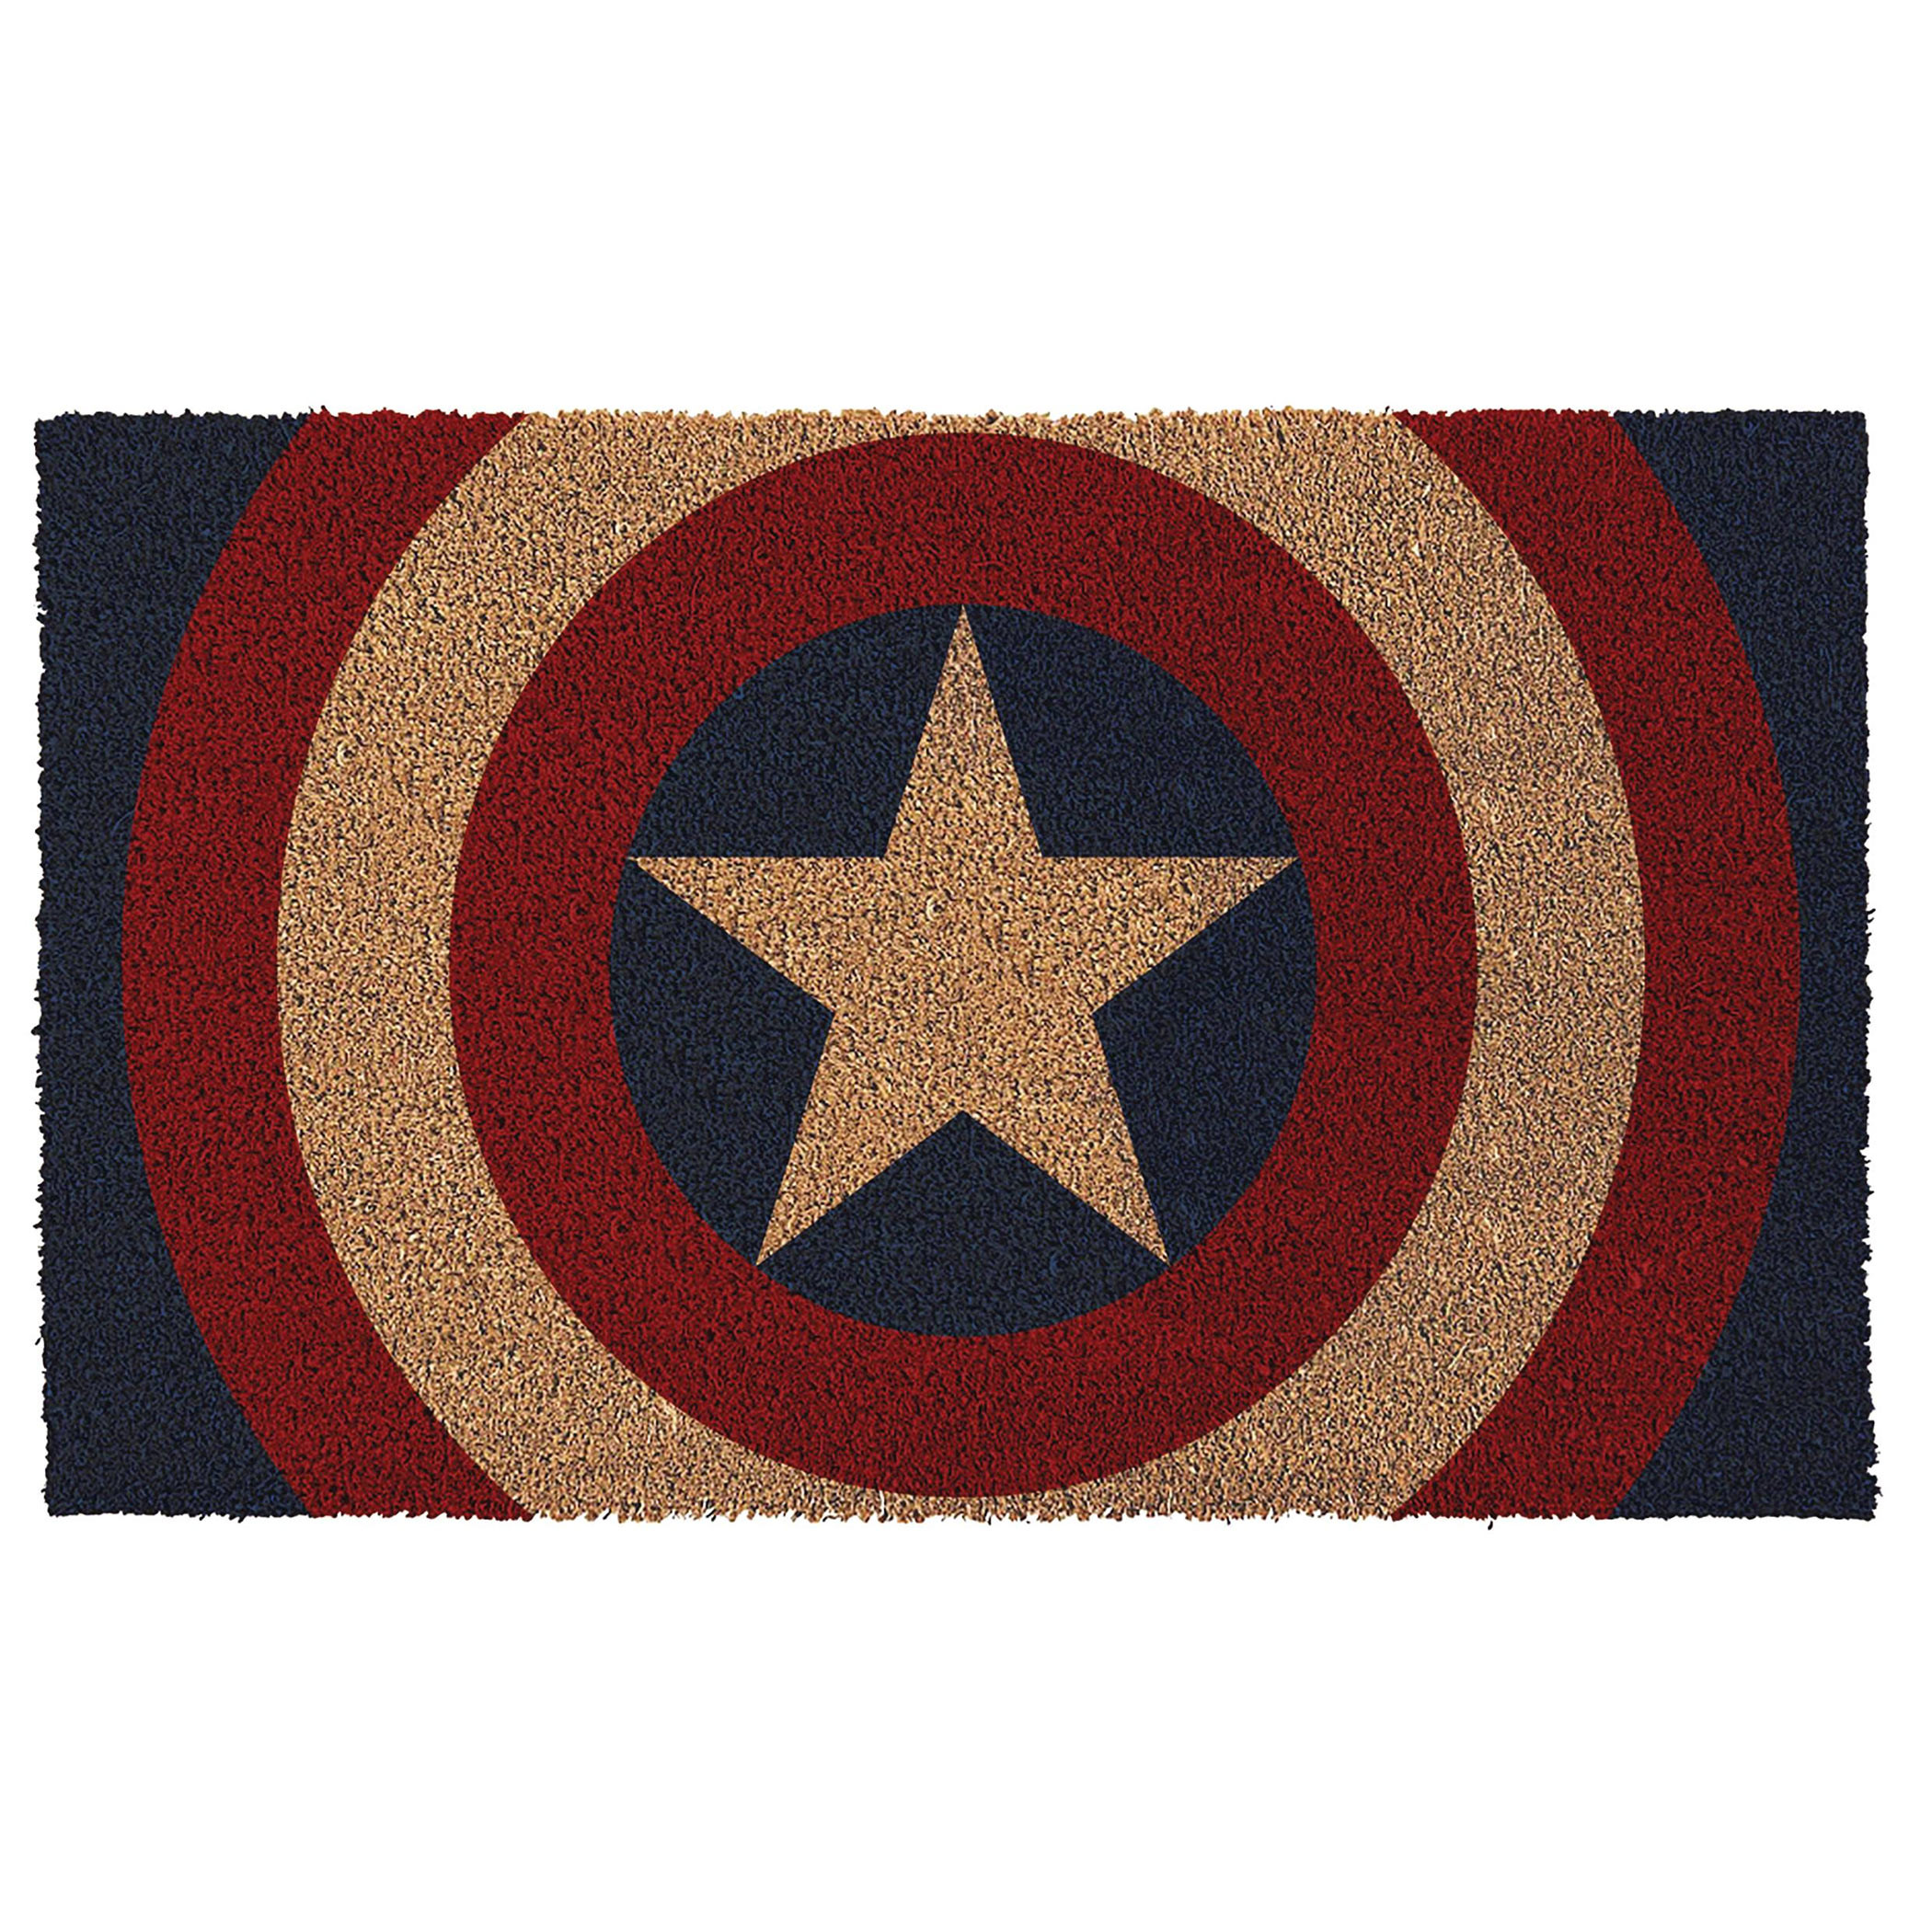 Captain America Shield 17"x 29" Doormat with Non-skid Back